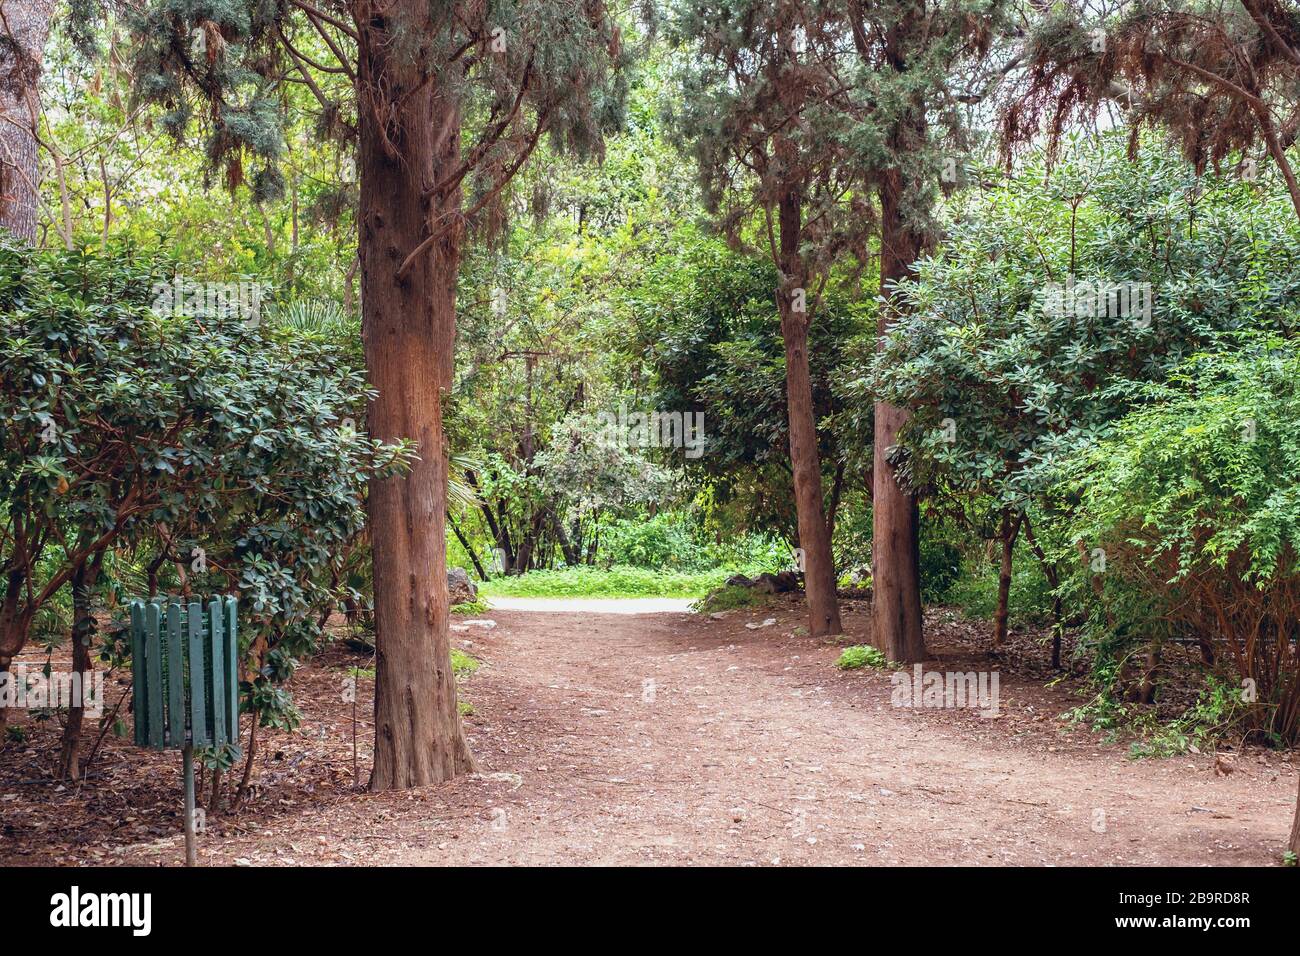 In Garden Of Academy In Athens High Resolution Stock Photography and